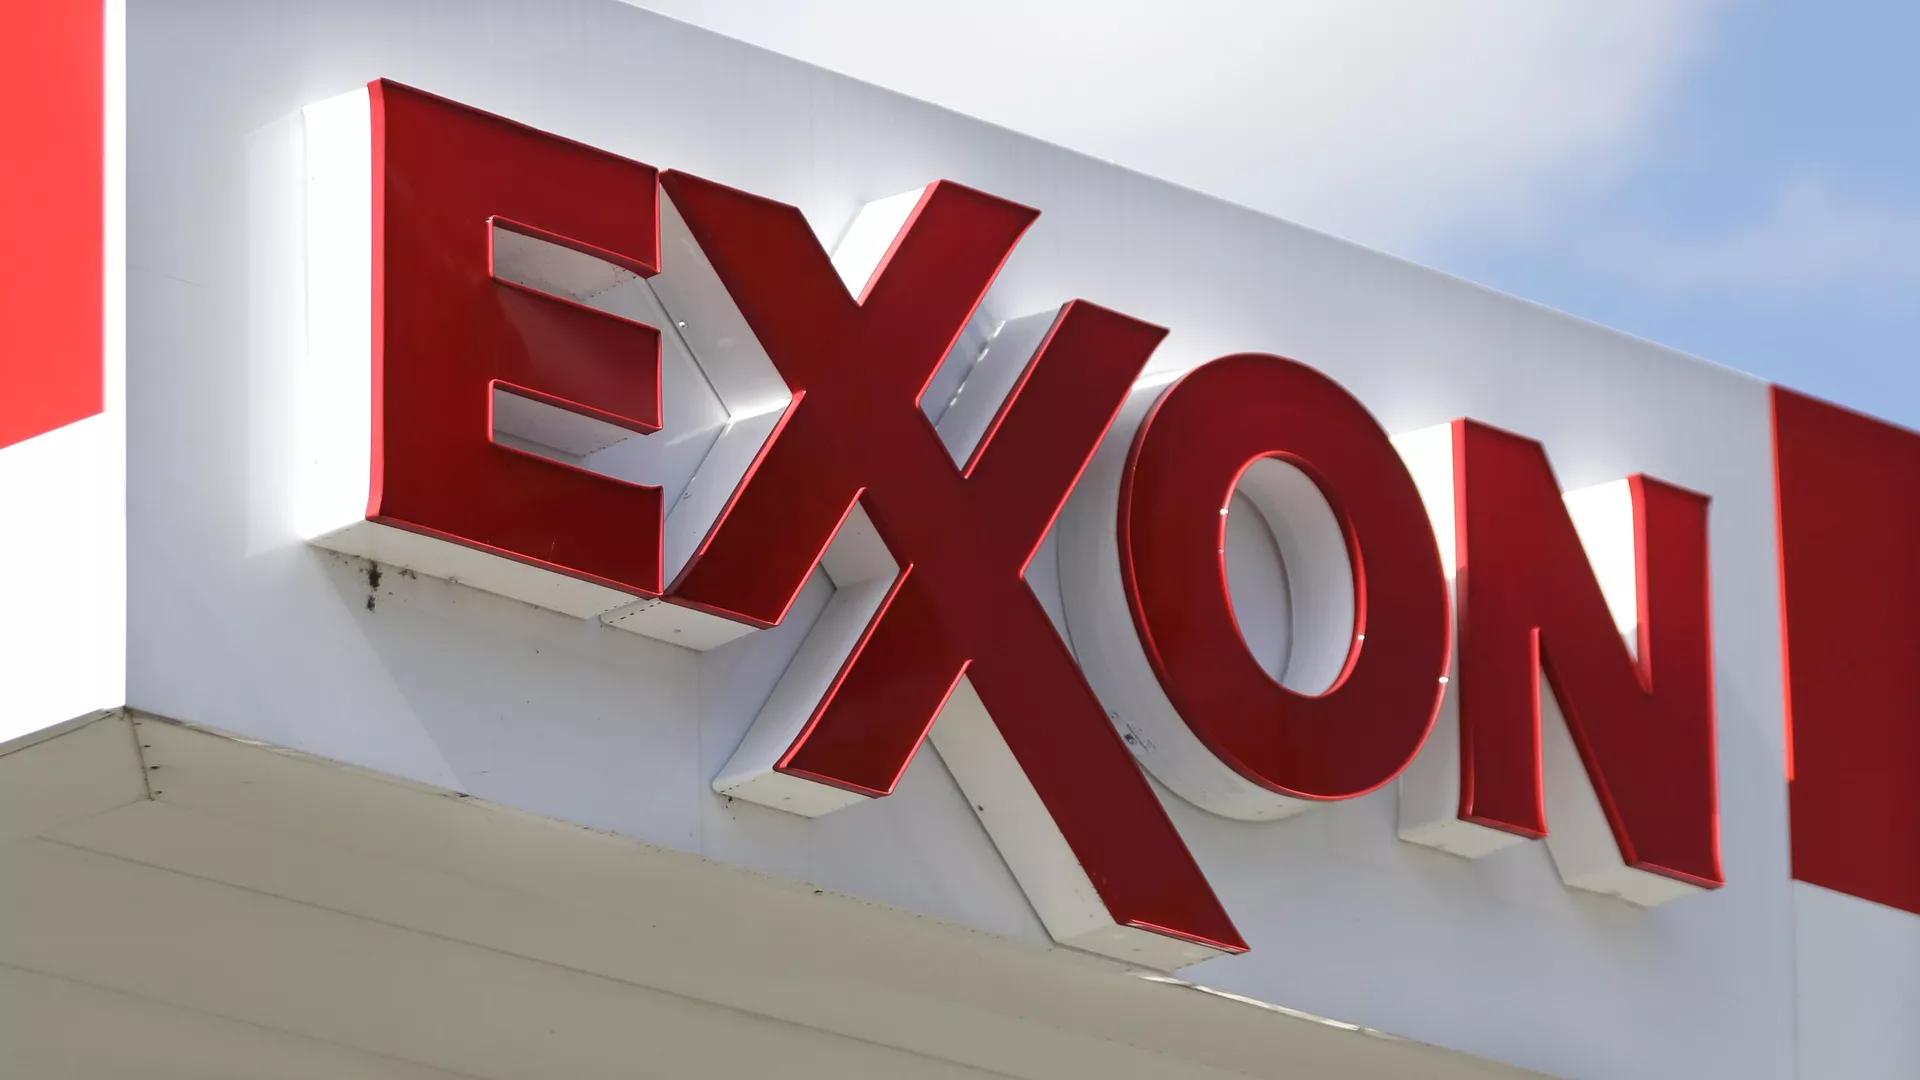 Exxon Set to Wind Down Africa Oil Production After 2026, Media Report